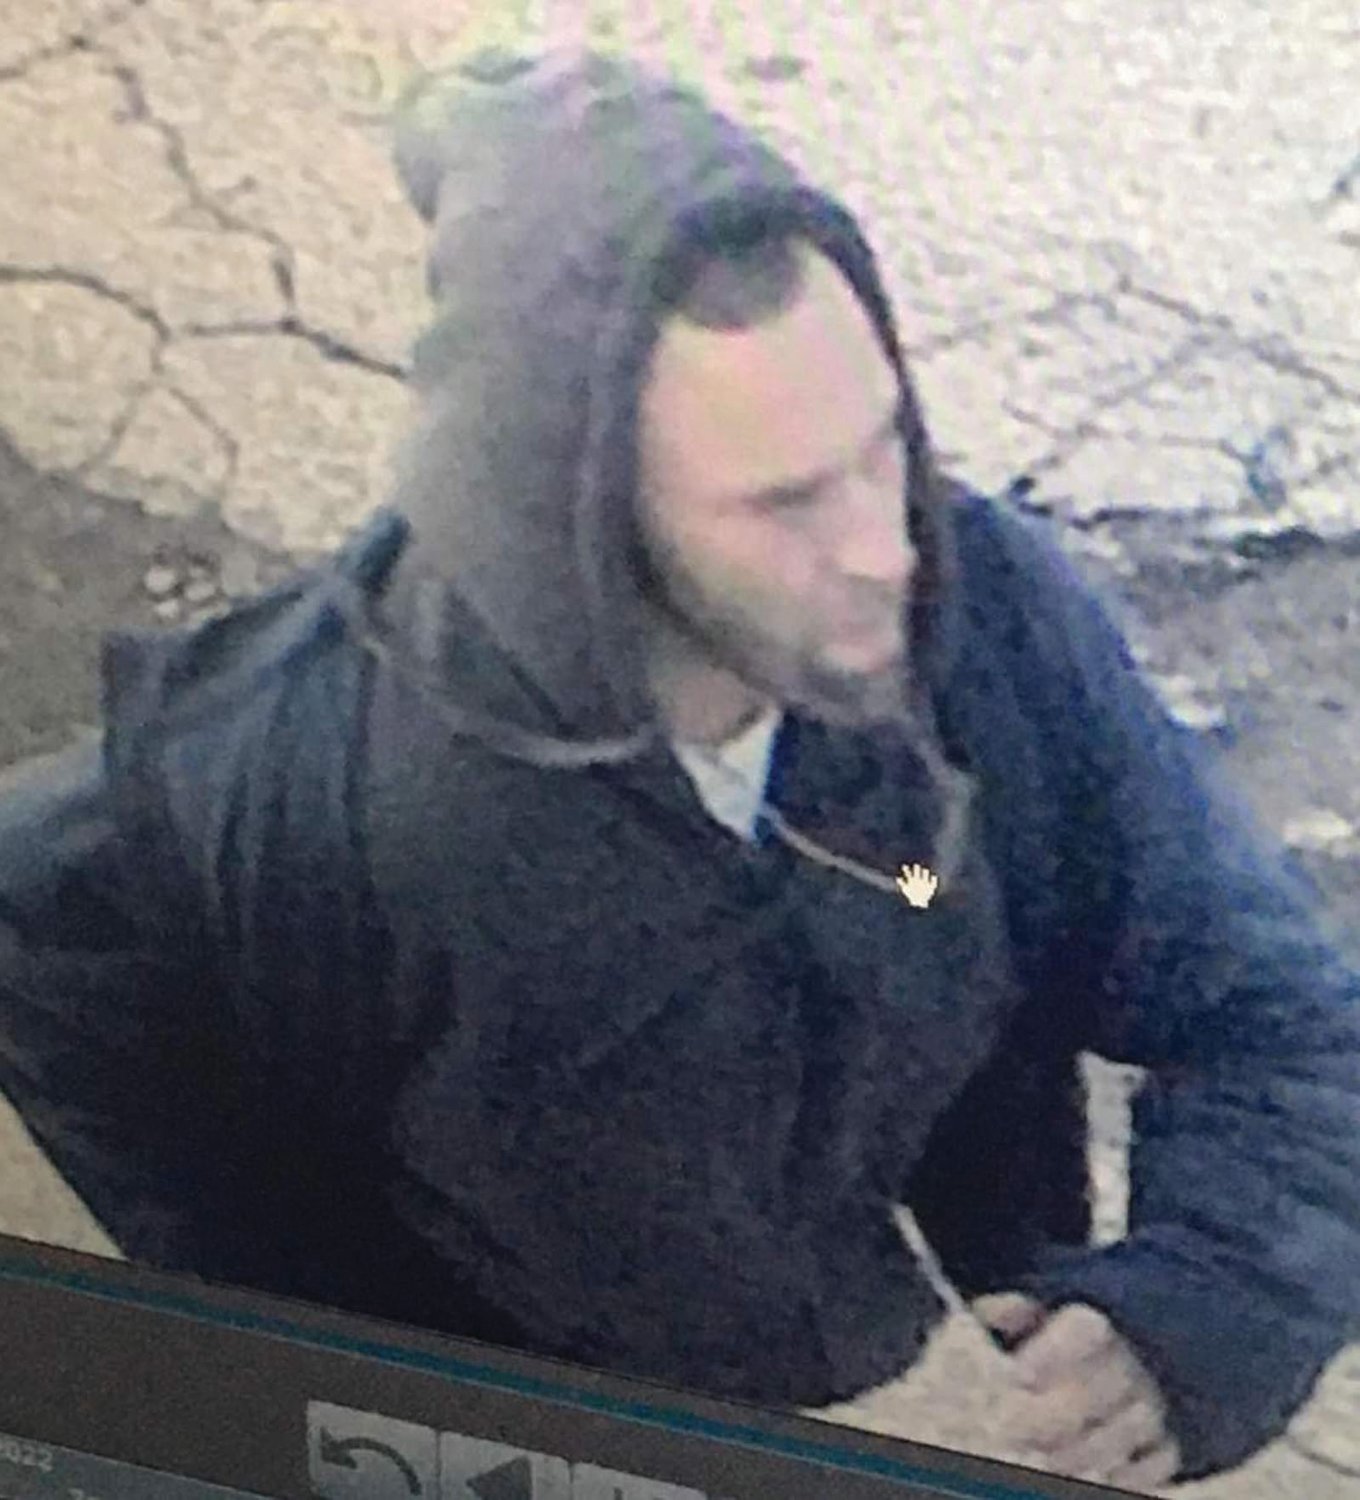 The Johnston Police Department has asked for the public’s assistance in identifying and locating a suspect involved in a breaking and entering case. Anyone with information regarding identity of the suspect is asked to contact Johnston Police Detective Steven Lopez at the Johnston Police Department, 401-757-3119. Reference police incident report 22-21-OF.